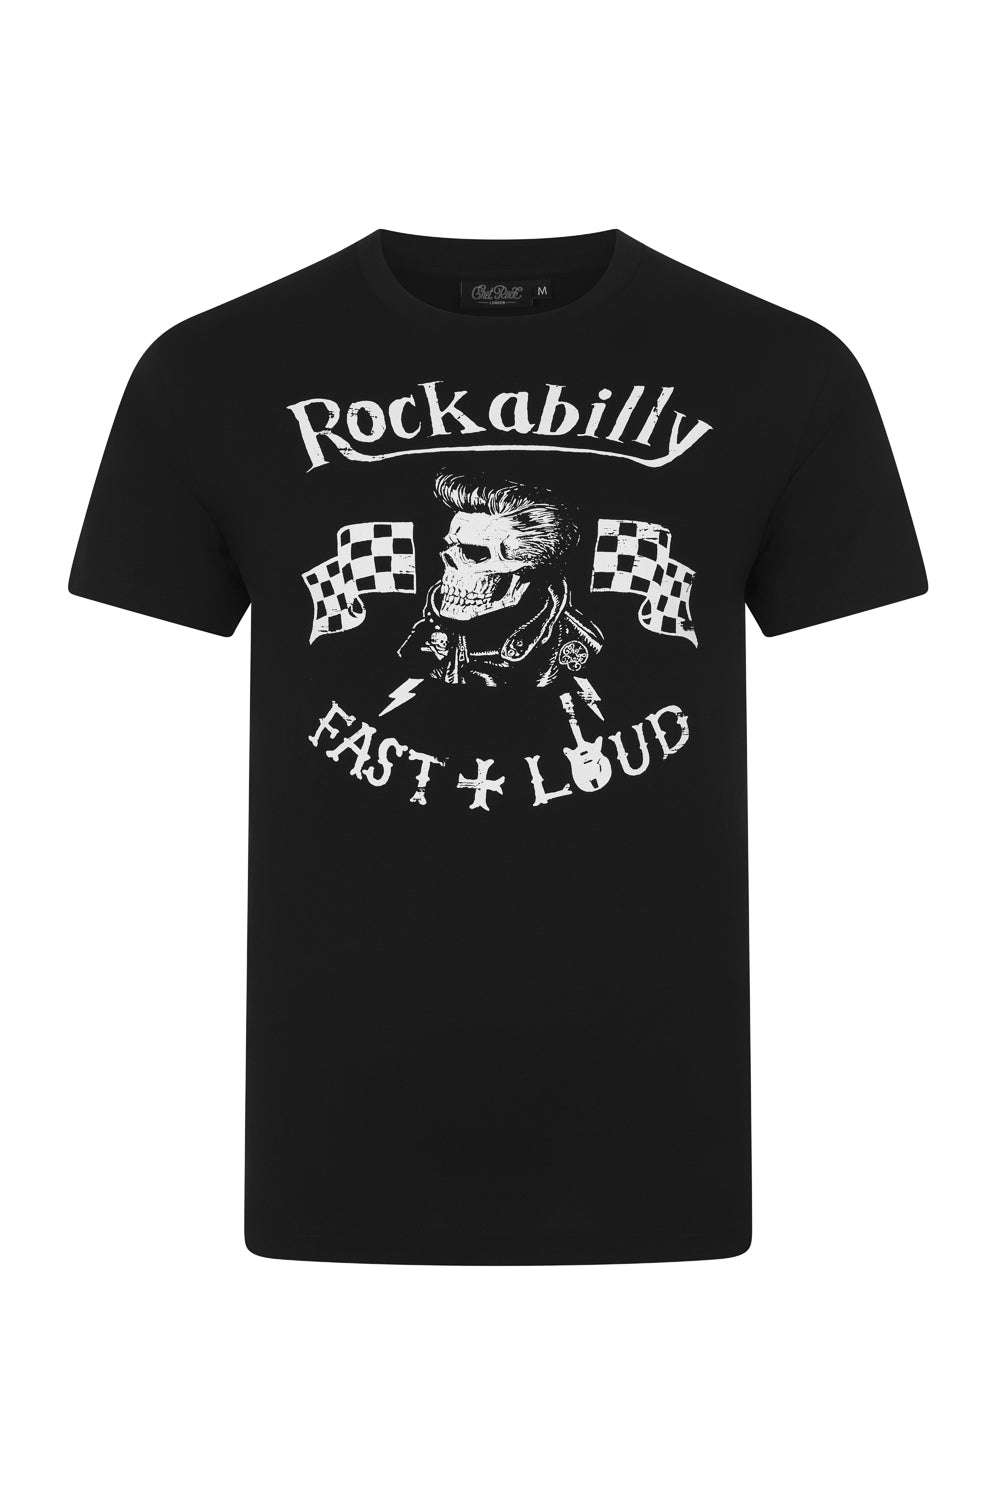 Fast and Loud t-shirt